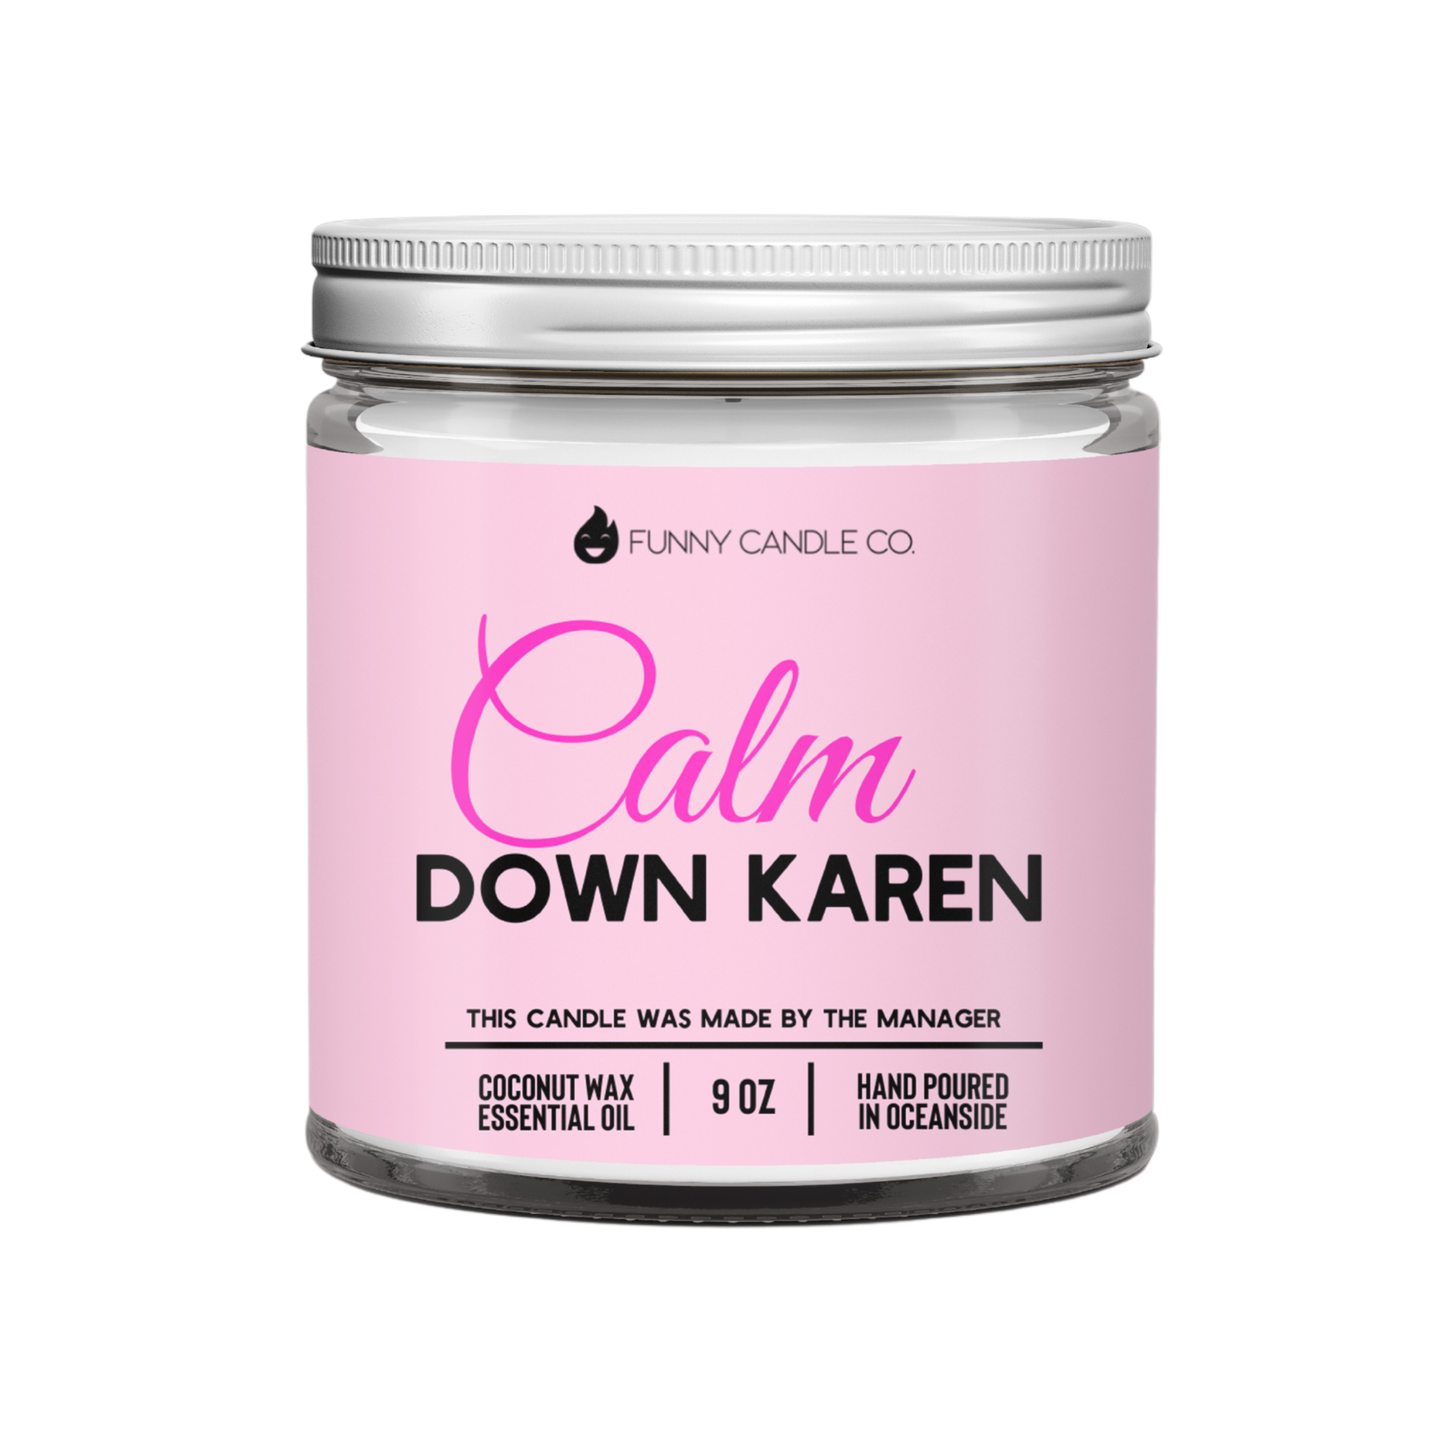 Calm down Karen Candle -9 oz funny candle coconut wax - Paisley Grace Makery